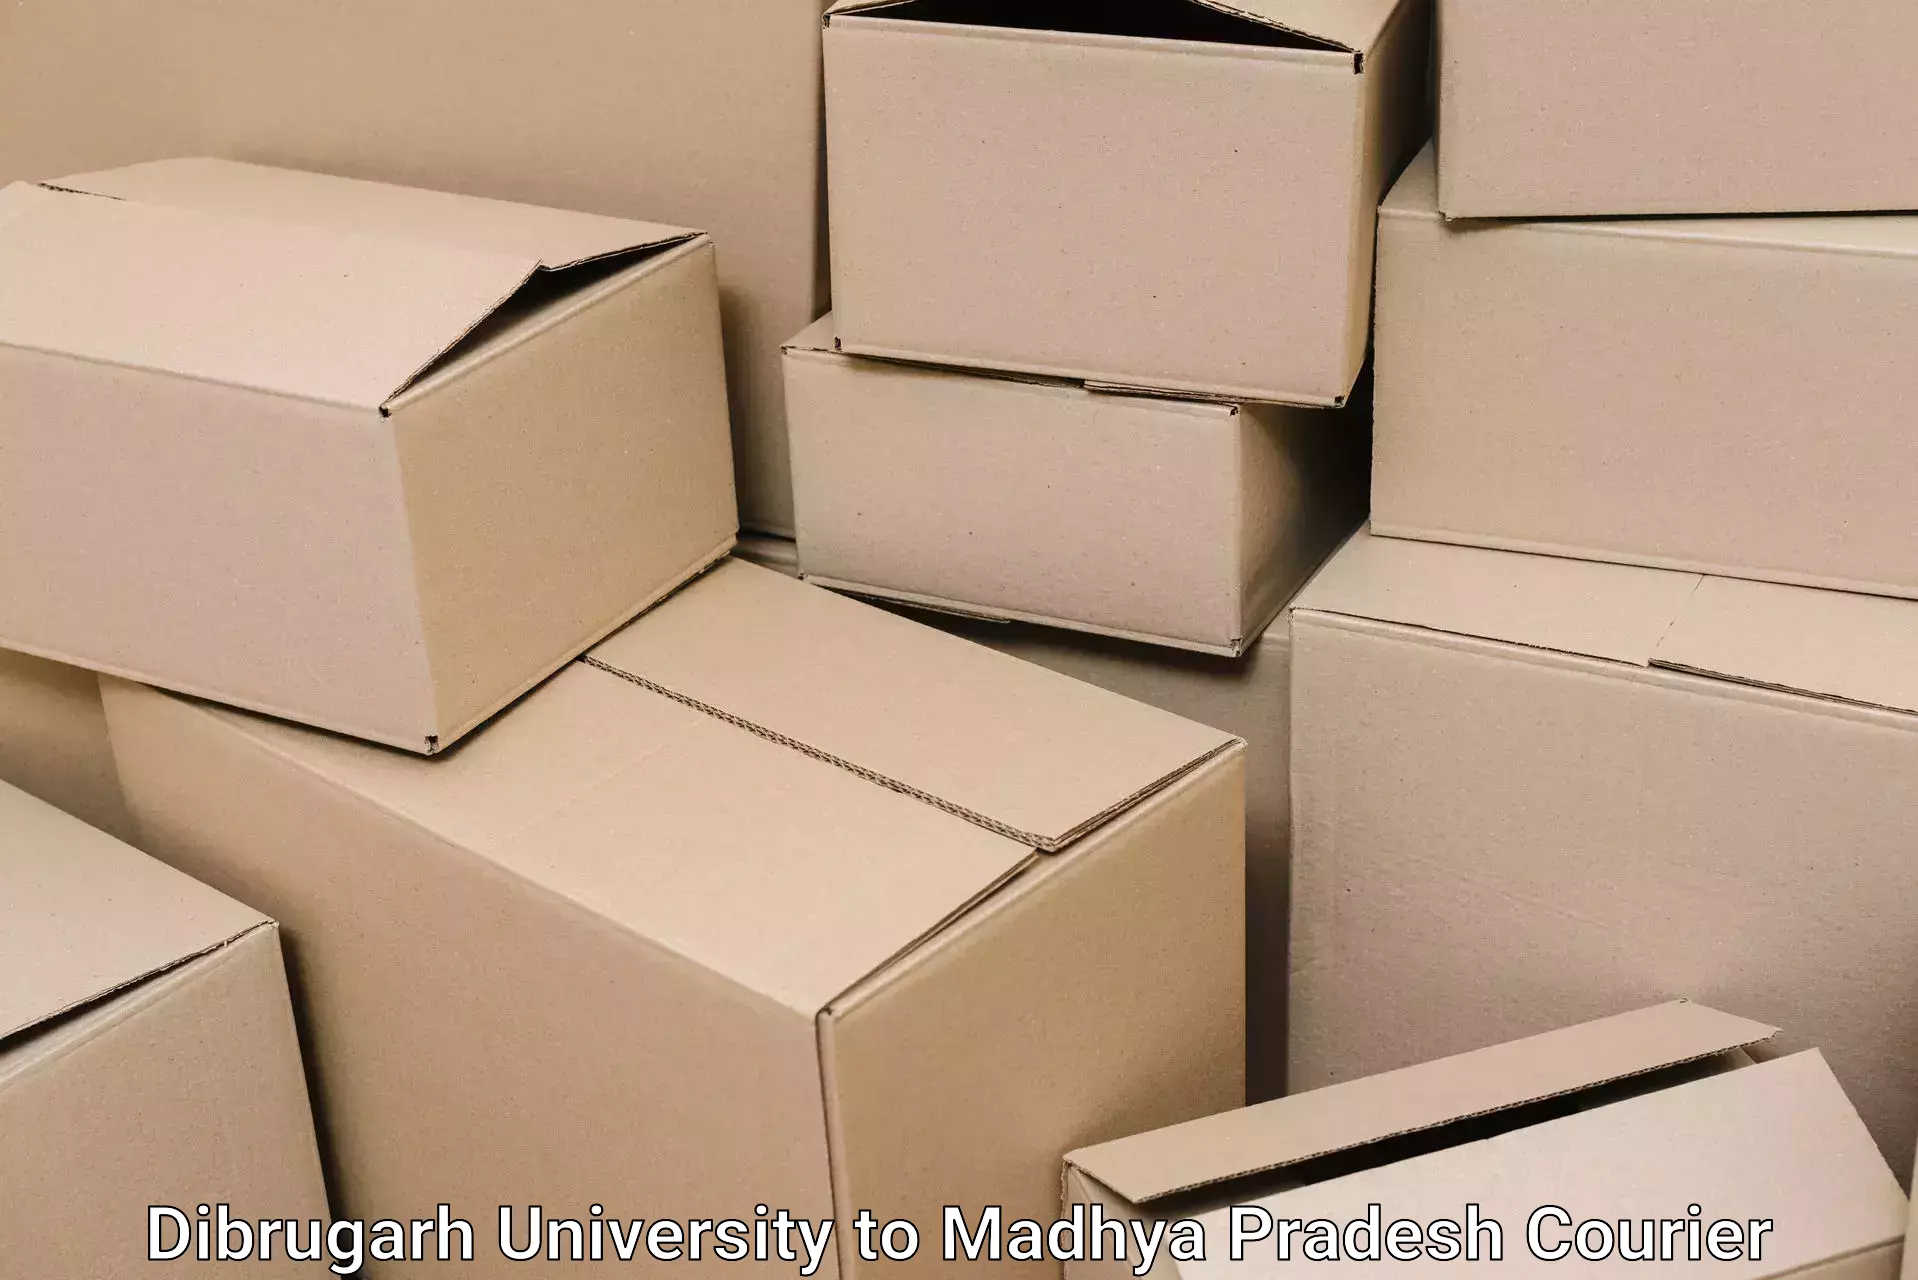 Trusted moving company Dibrugarh University to Nagod